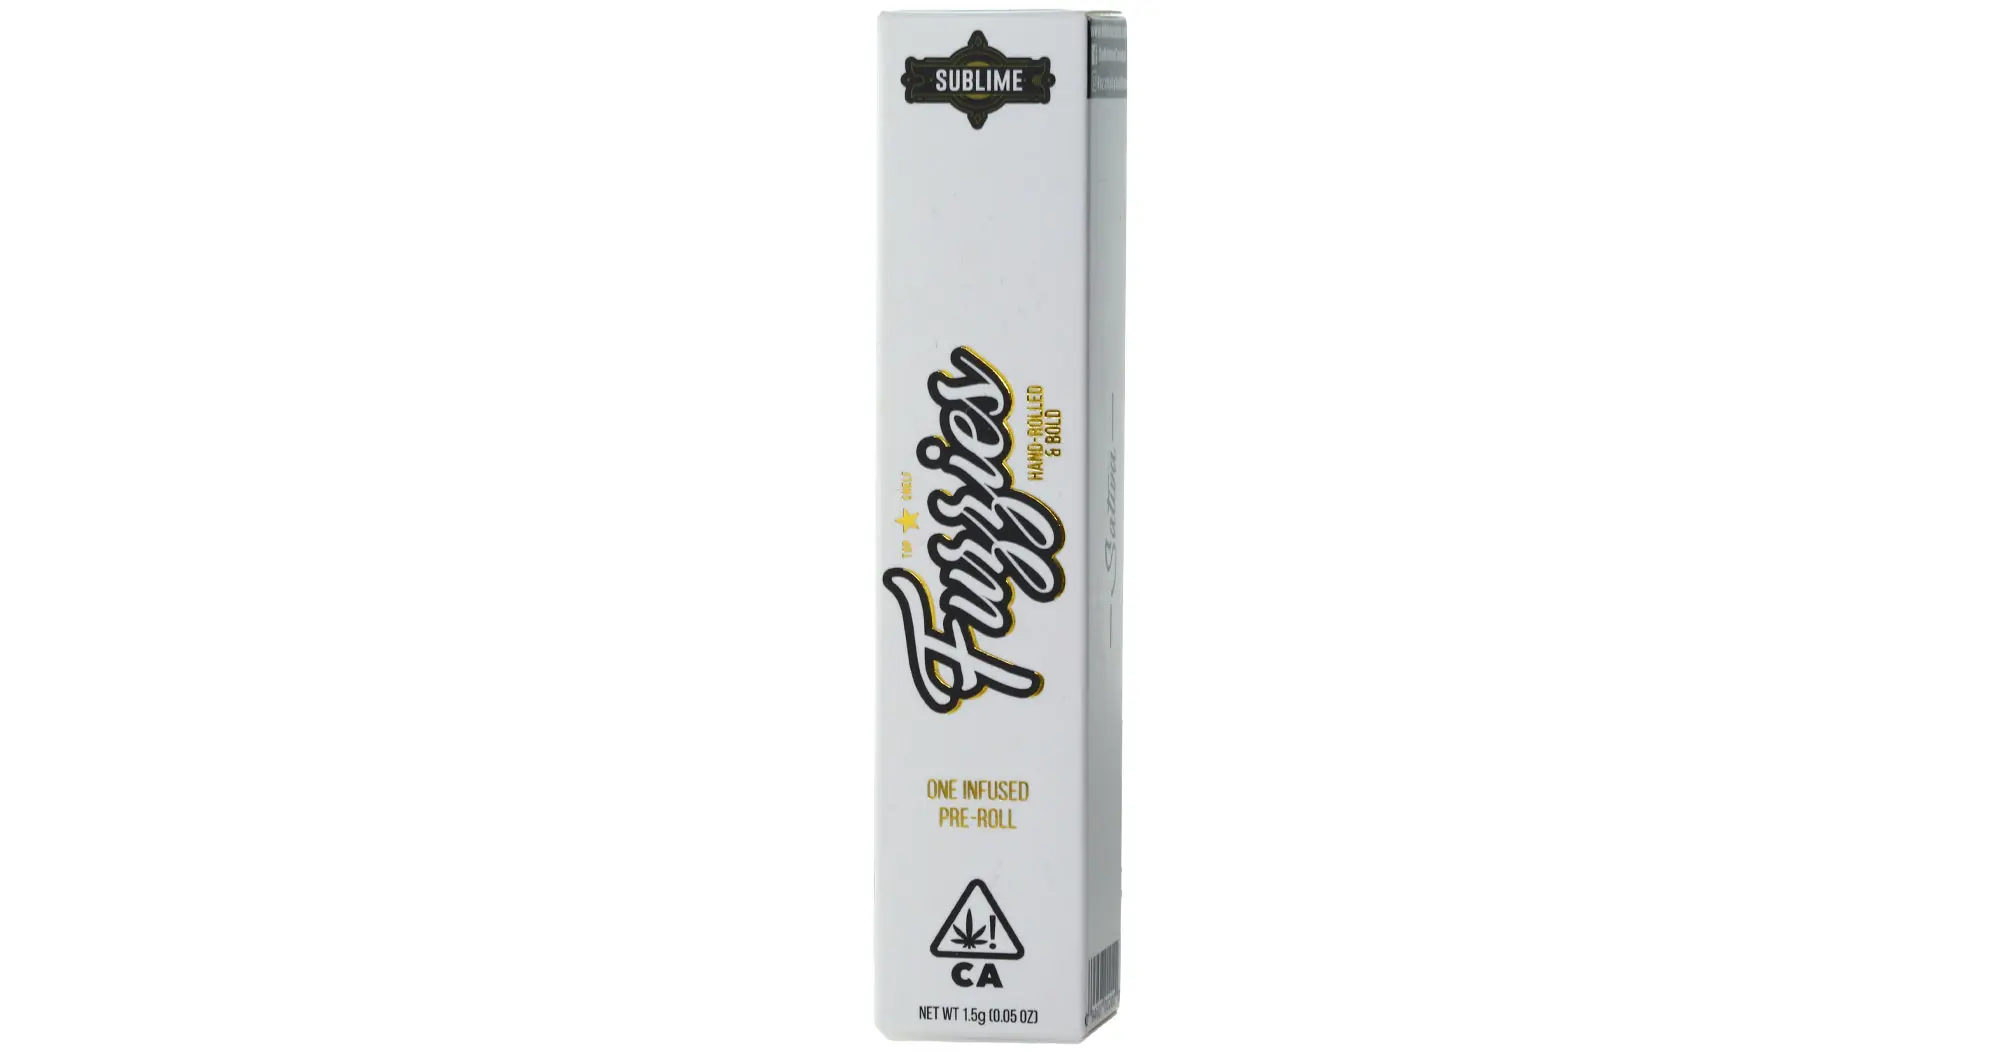 Super Silver Haze Infused King Size Pre-Roll